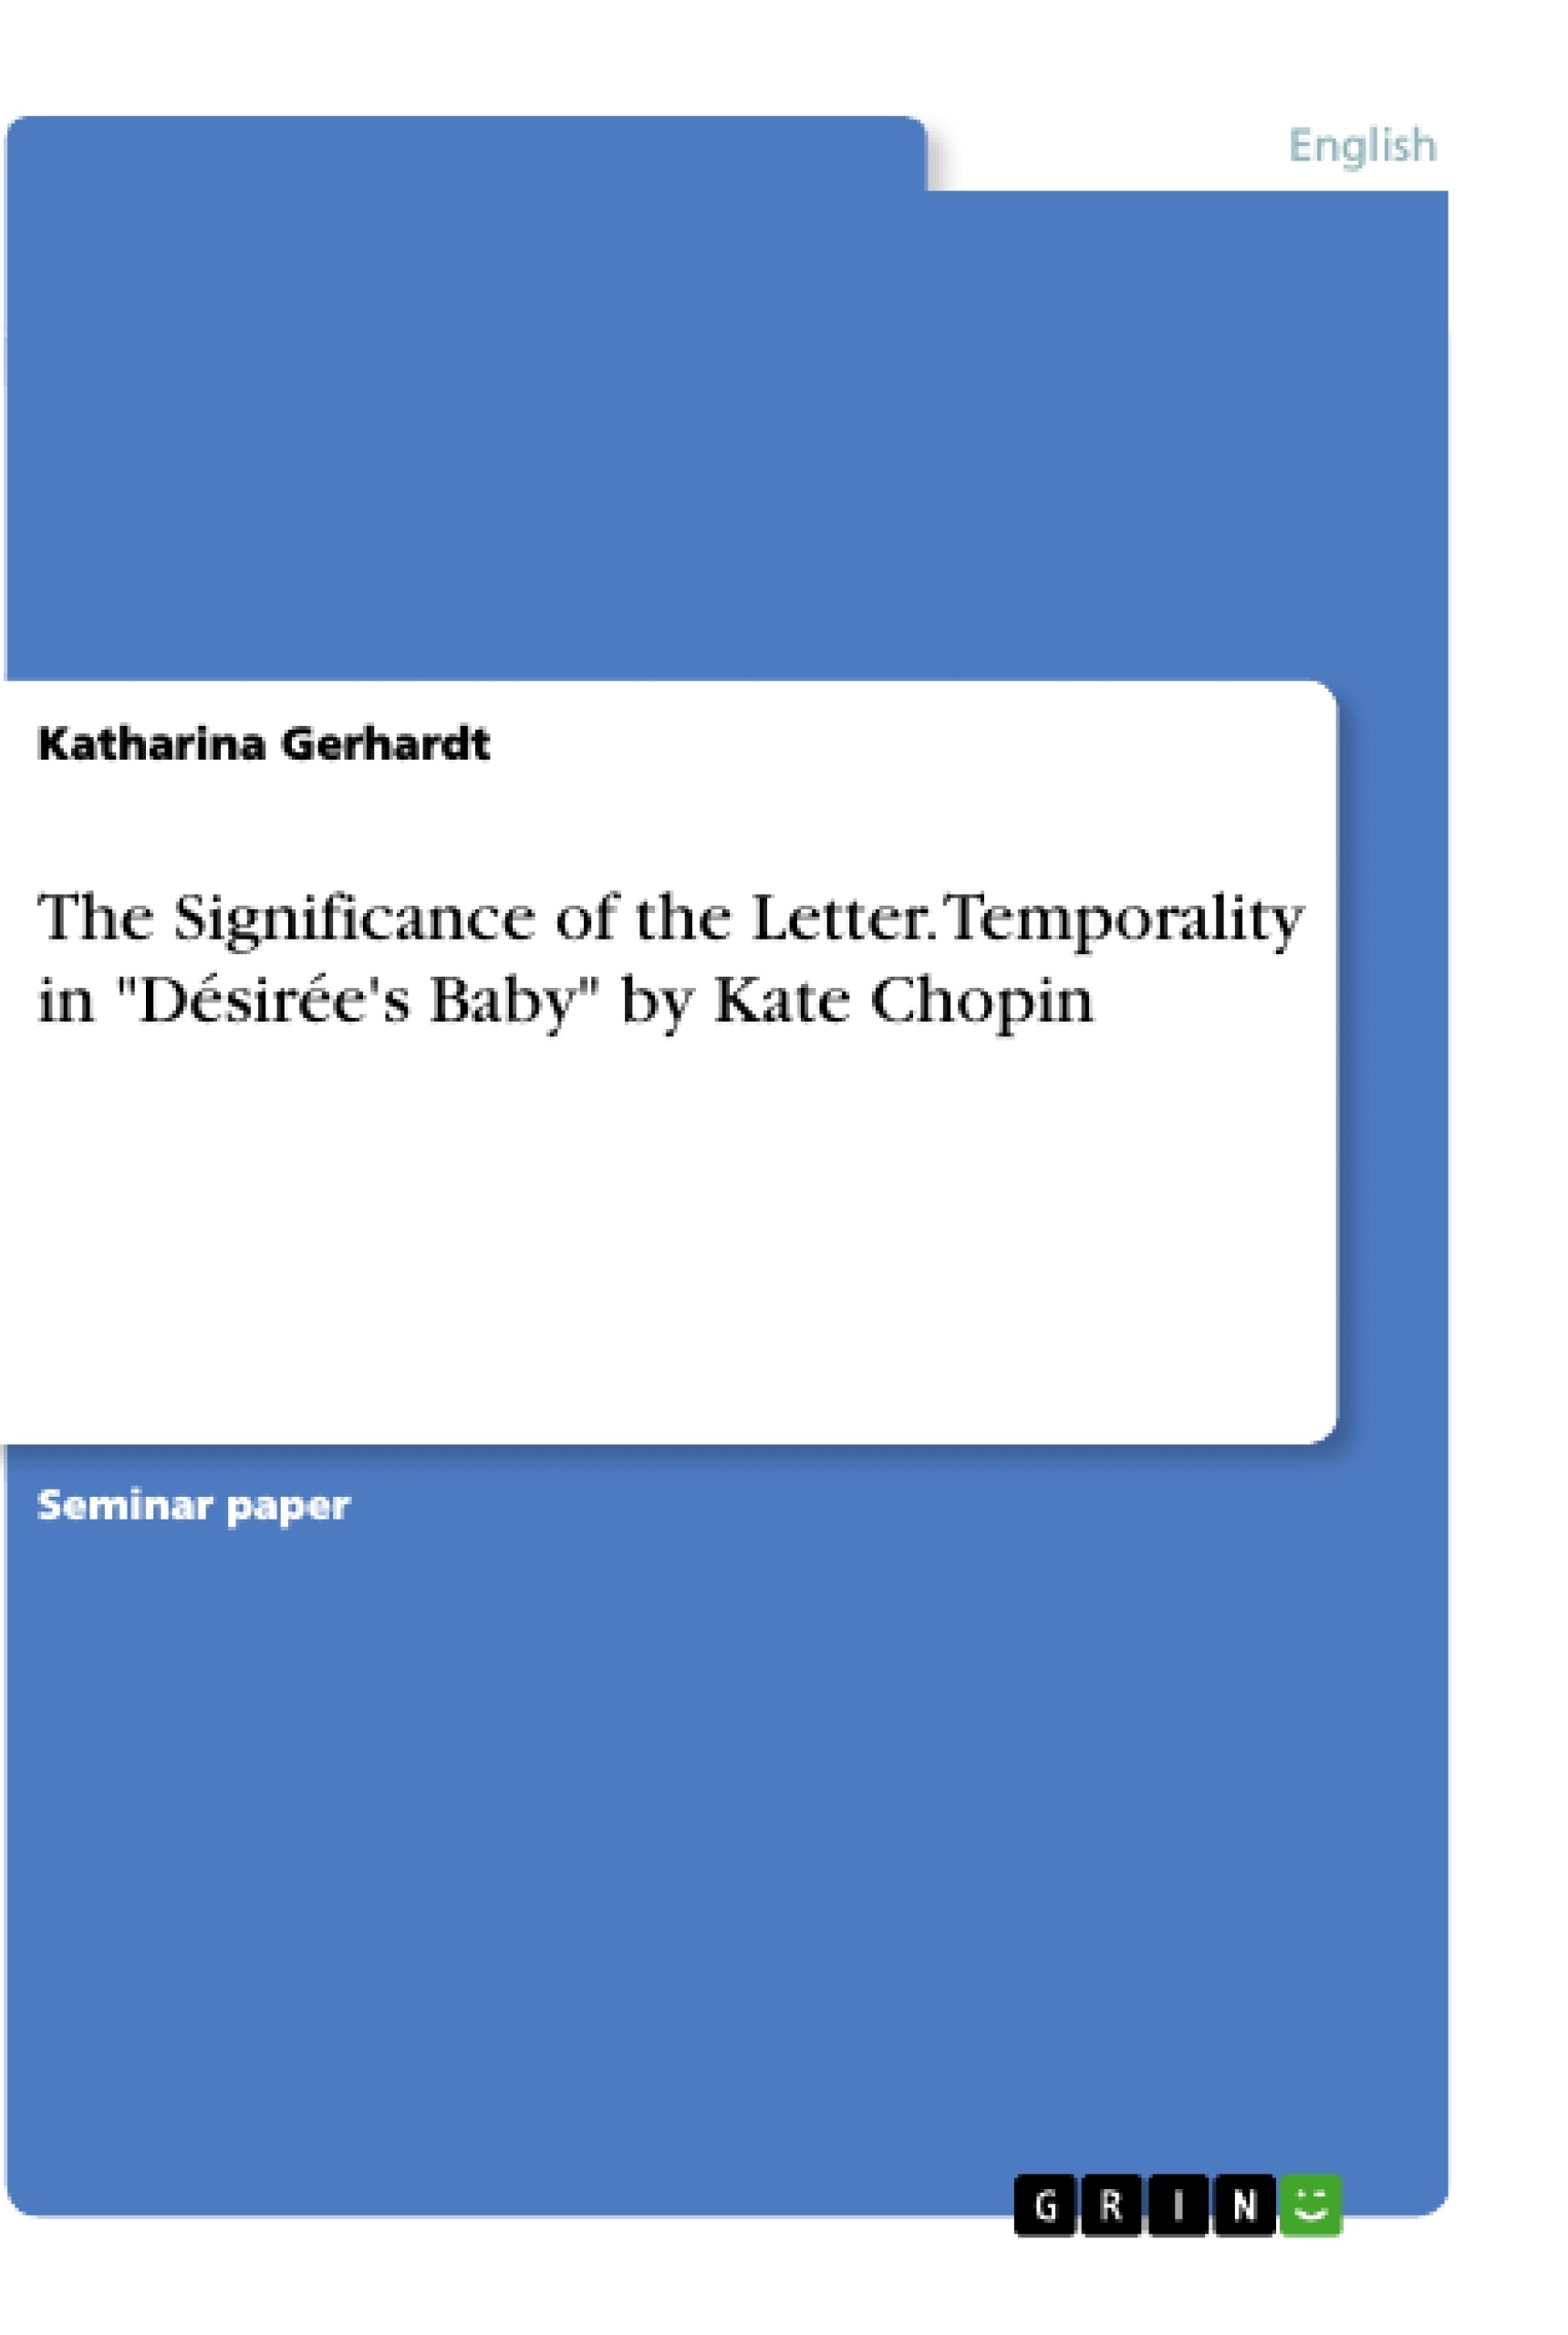 Titel: The Significance of the Letter. Temporality in "Désirée's Baby" by Kate Chopin